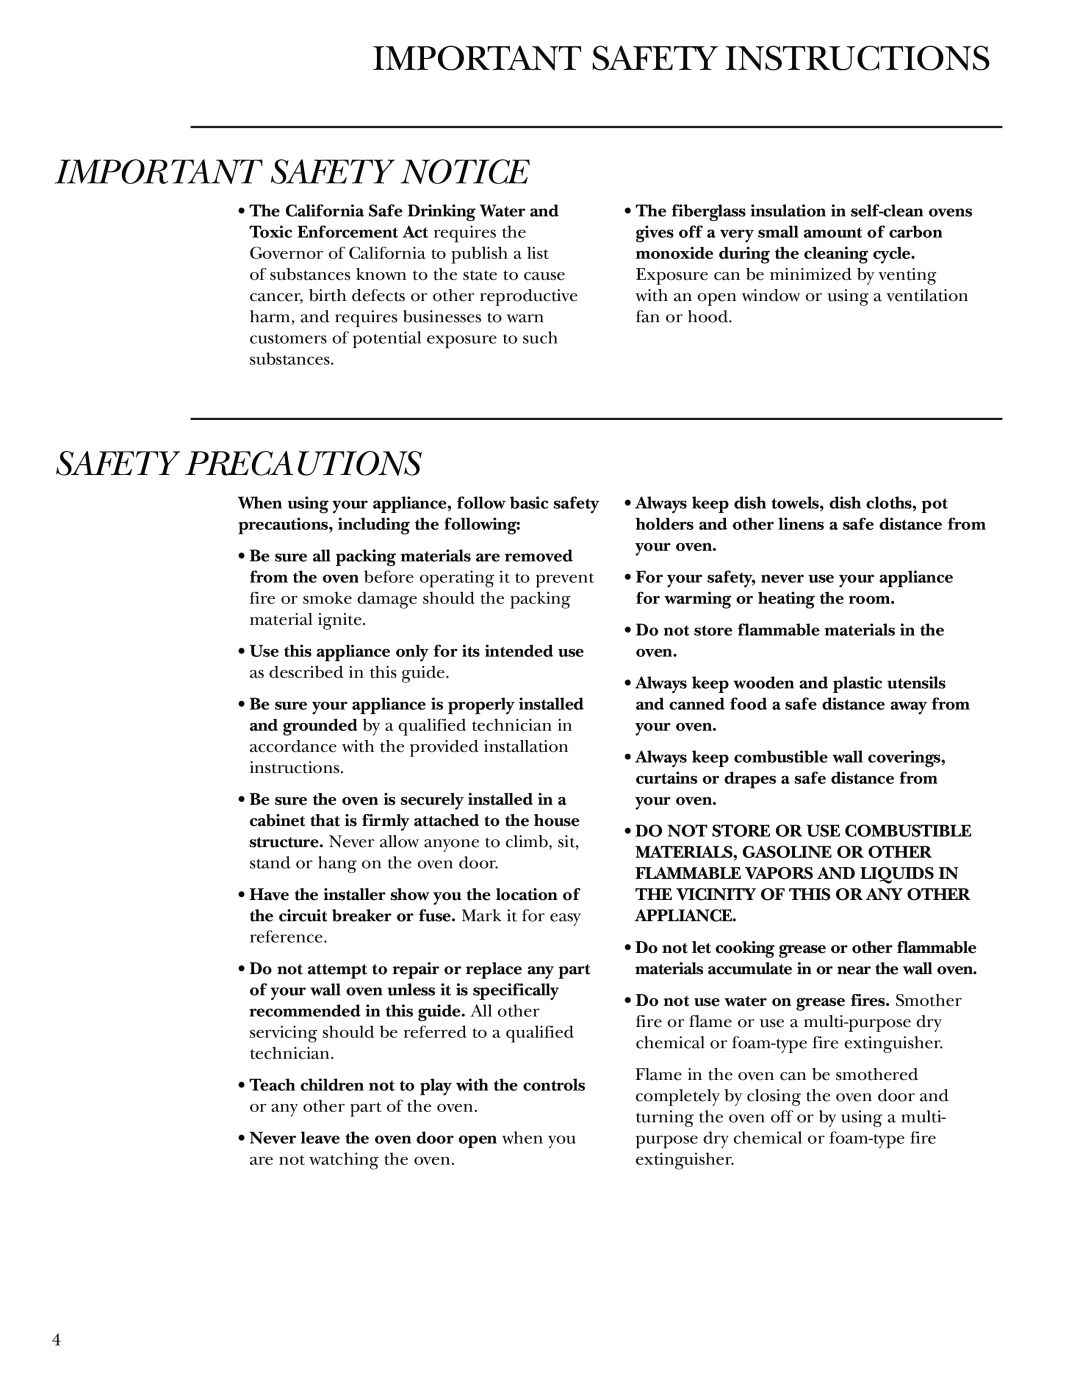 GE Monogram 30 Wall Oven manual Important Safety Instructions, Important Safety Notice, Safety Precautions 